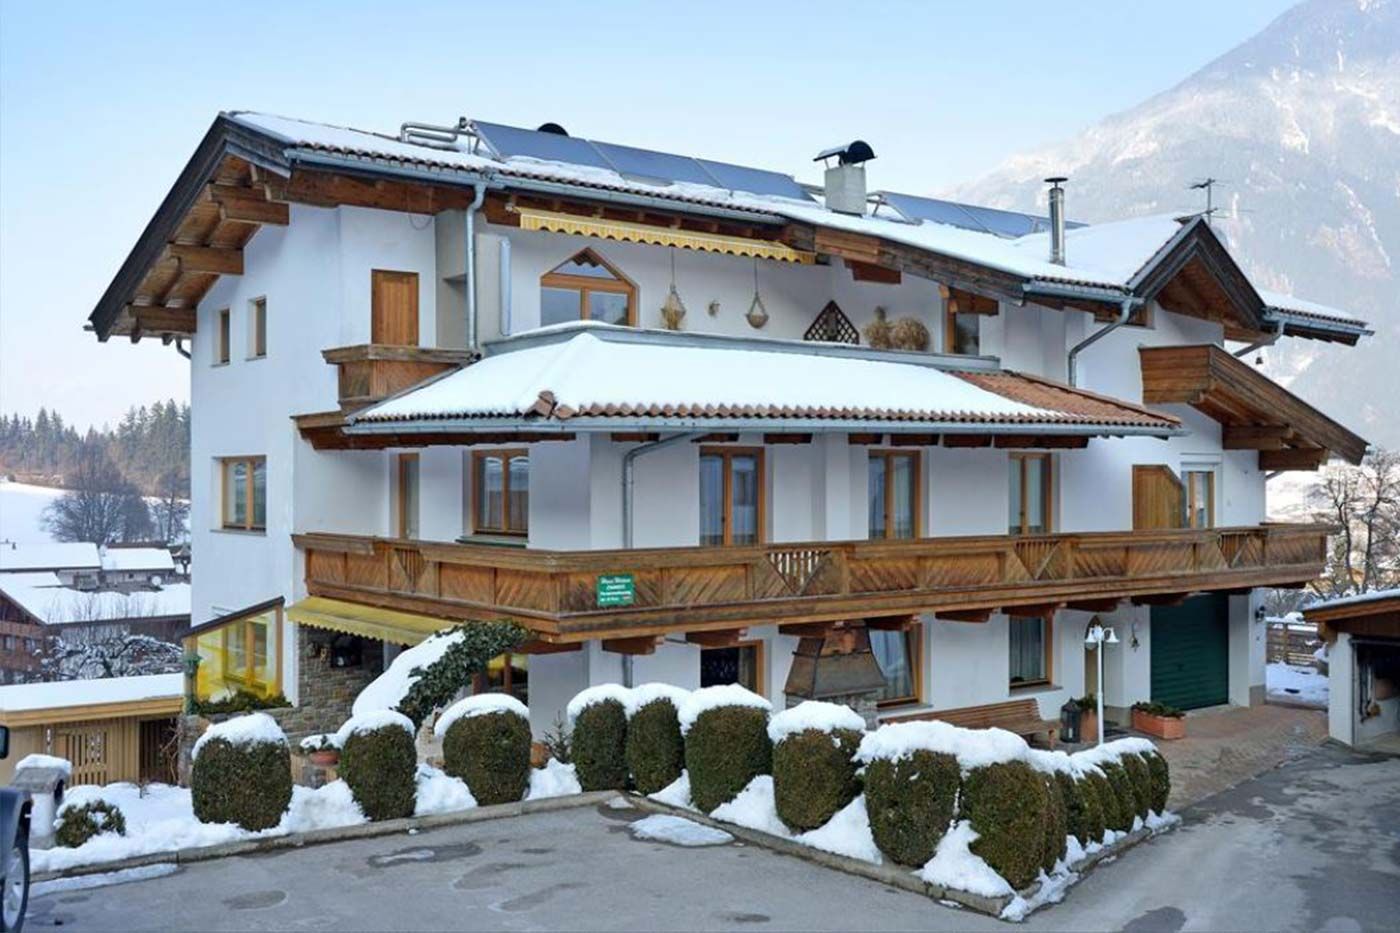 Welcome to our house in Kaltenbach!